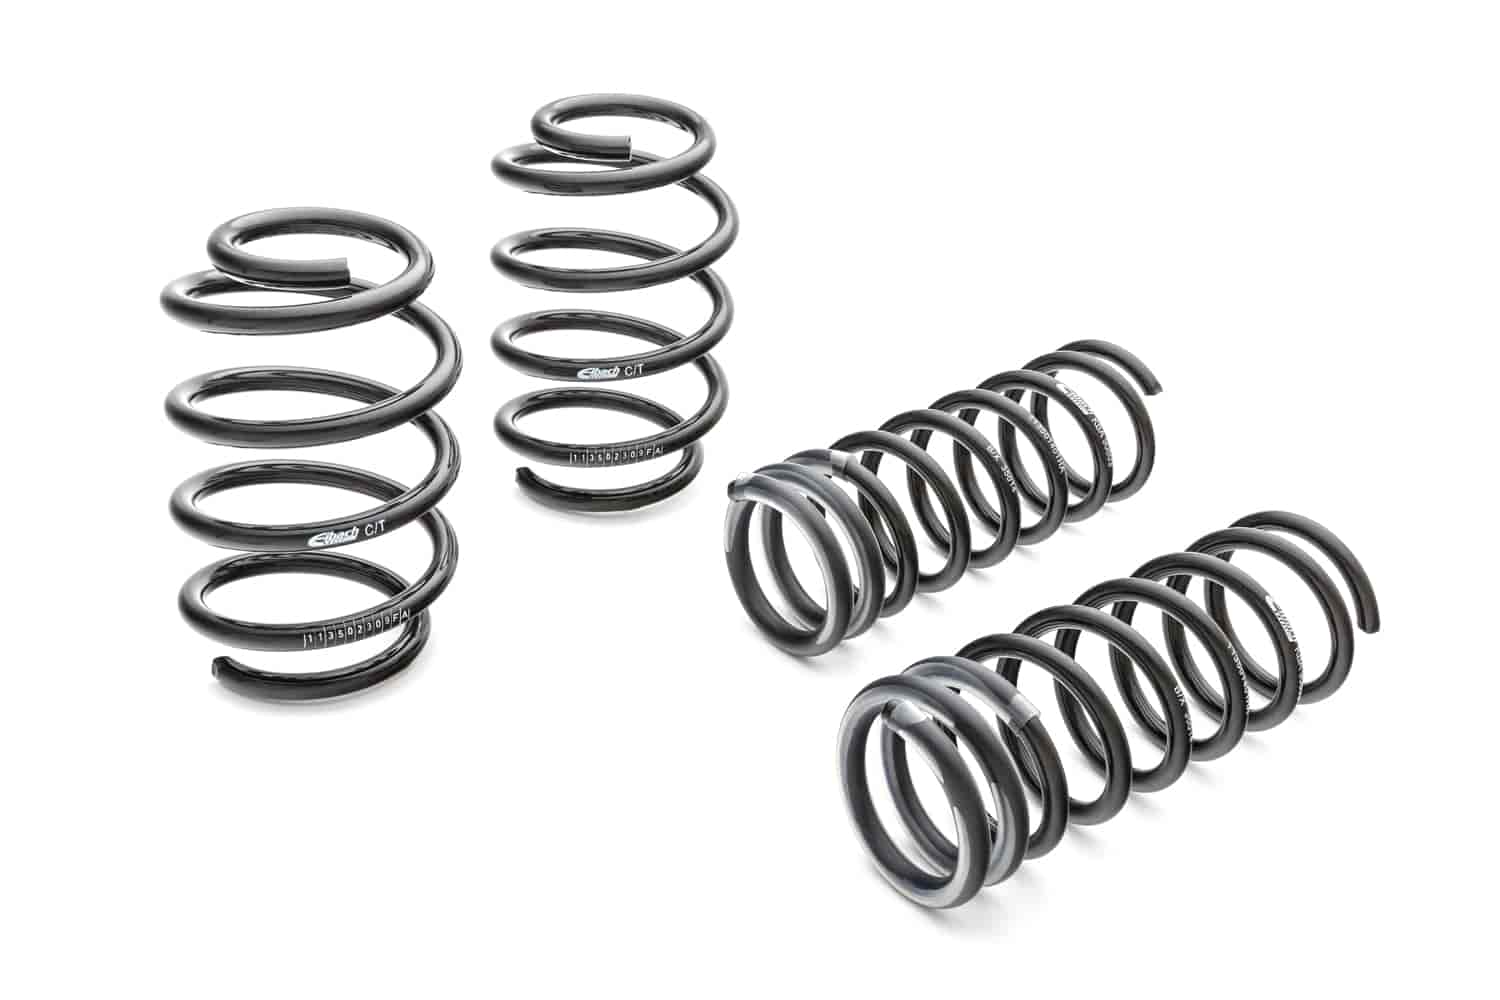 6395.140 Pro-Kit Lowering Springs 2009-2014 for Nissan Cube - 1.300 in. Front/1 in. Rear Drop